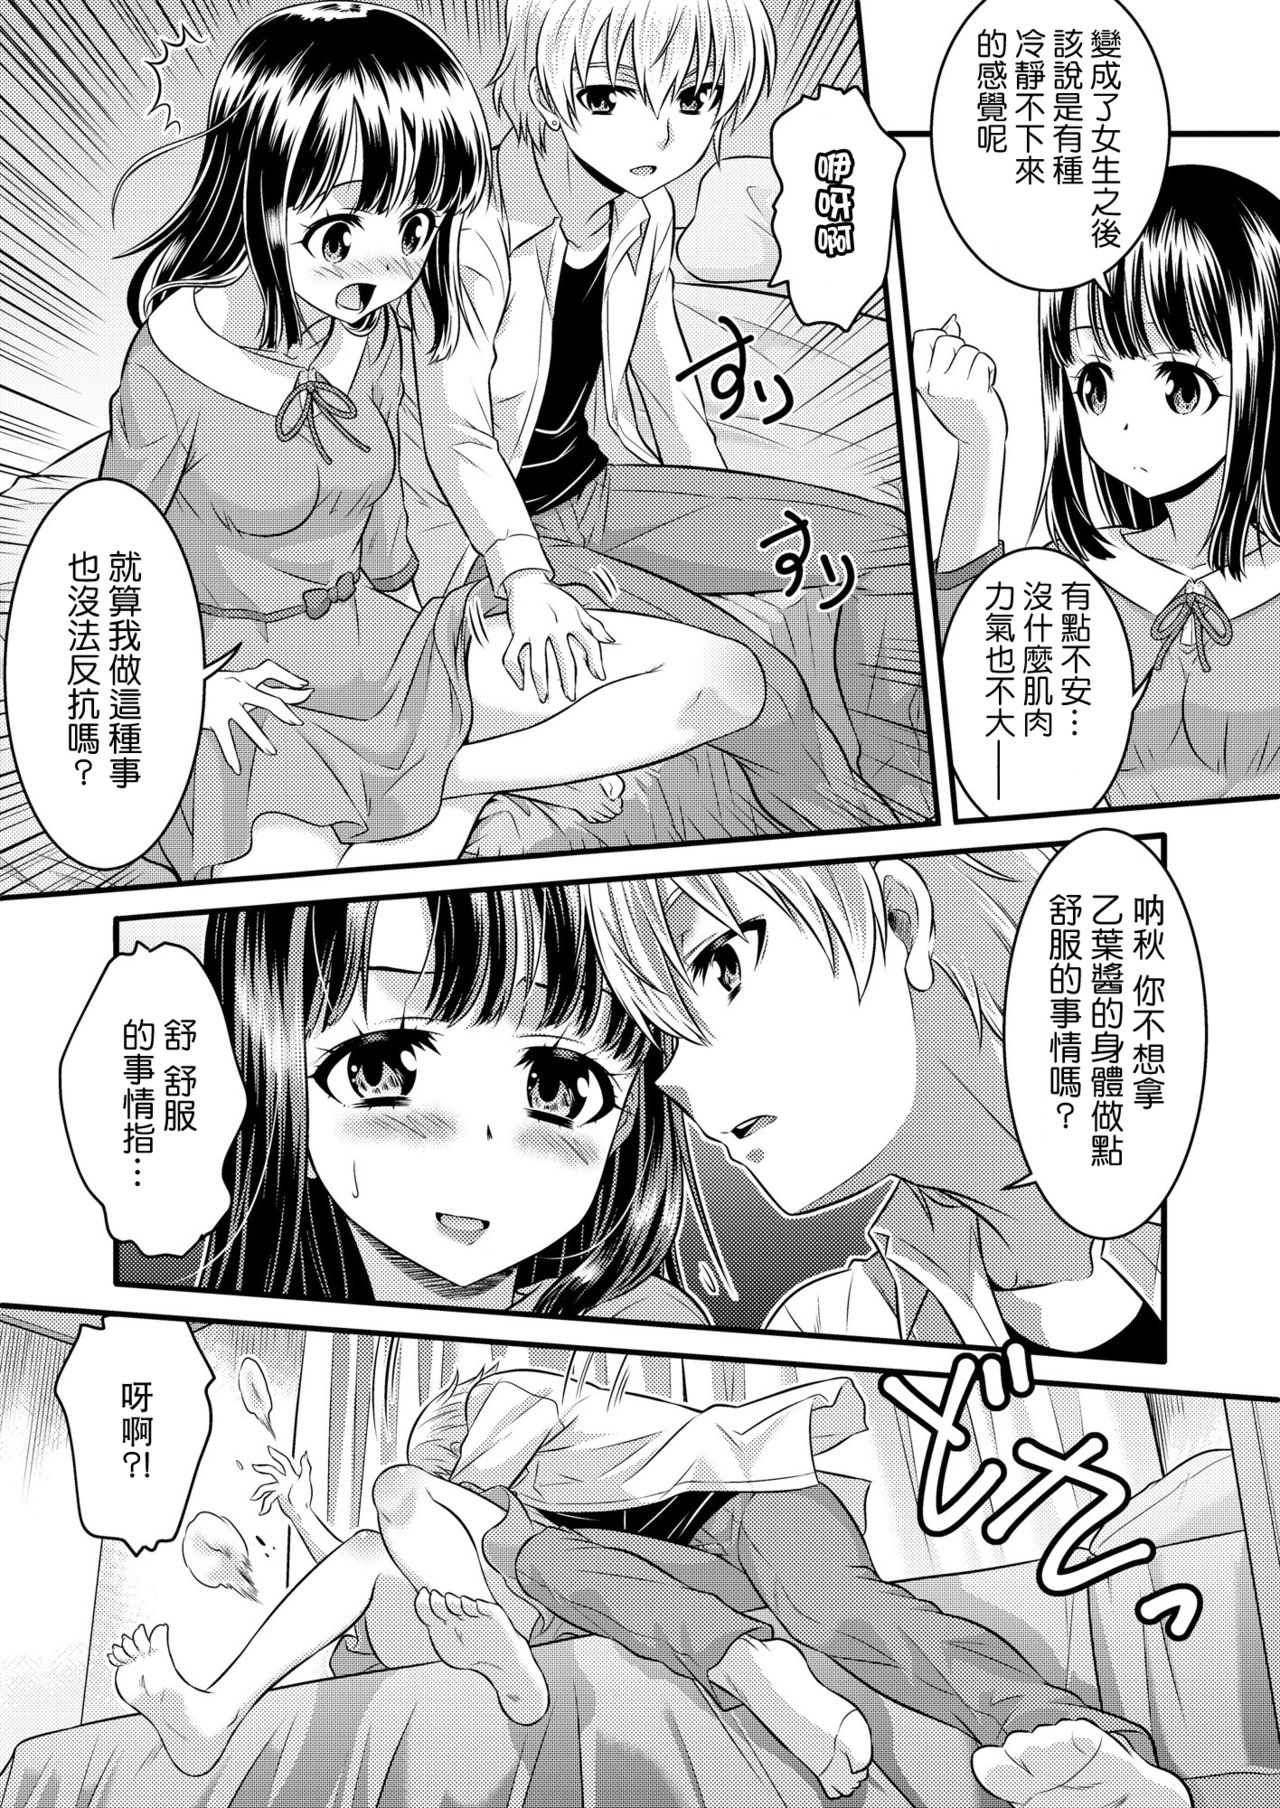 Metamorph ★ Coordination - I Become Whatever Girl I Crossdress As~ [Sister Arc, Classmate Arc] [Chinese] [瑞树汉化组] page 28 full